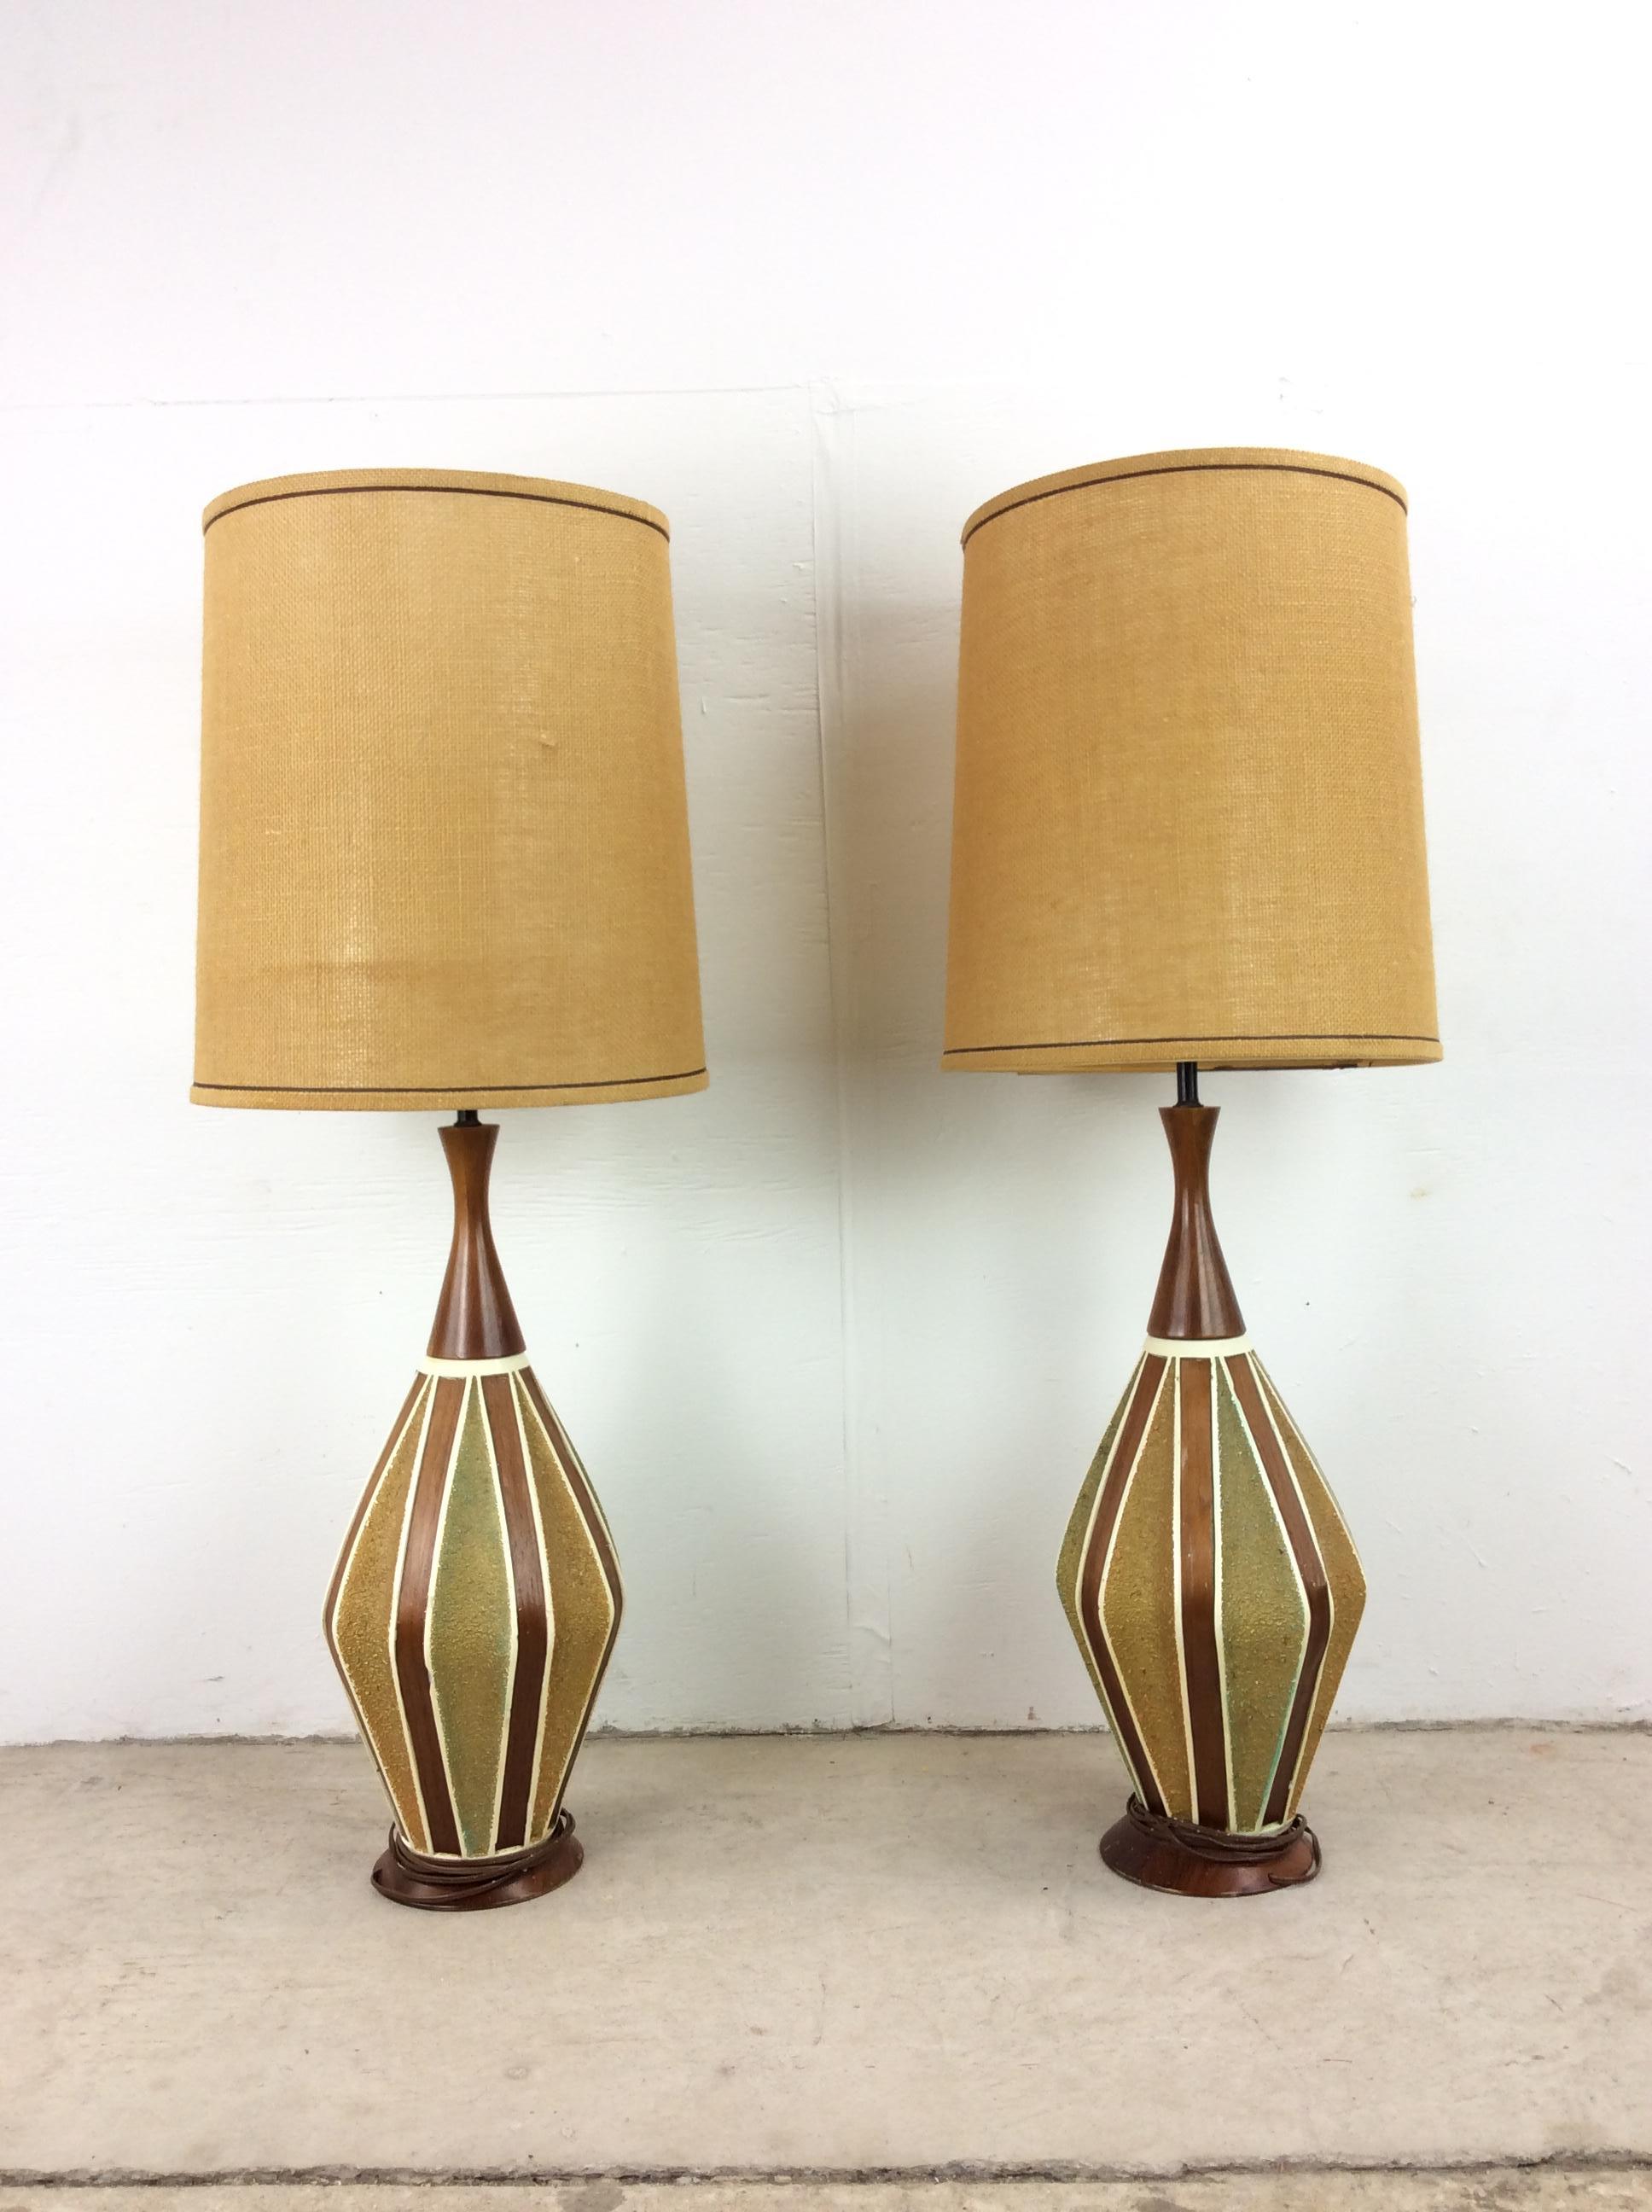 Pair of Mid Century Modern Ceramic Table Lamps with Barrel Shade In Fair Condition For Sale In Freehold, NJ